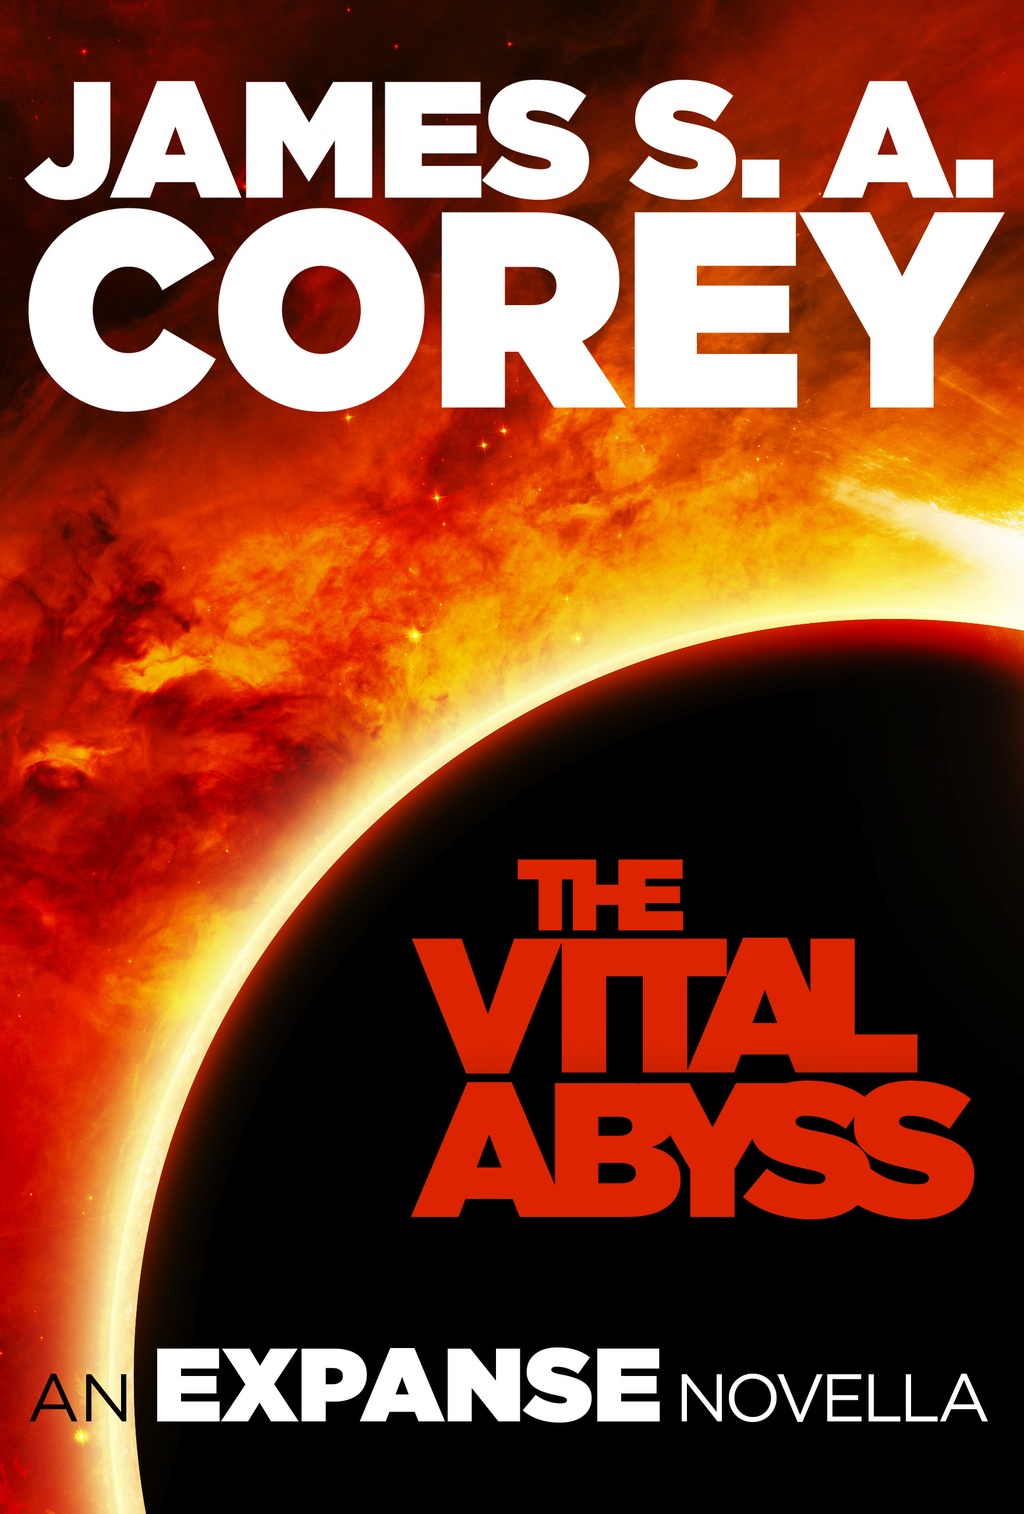 James S. A. Corey: The Vital Abyss (2015, Little, Brown Book Group Limited)